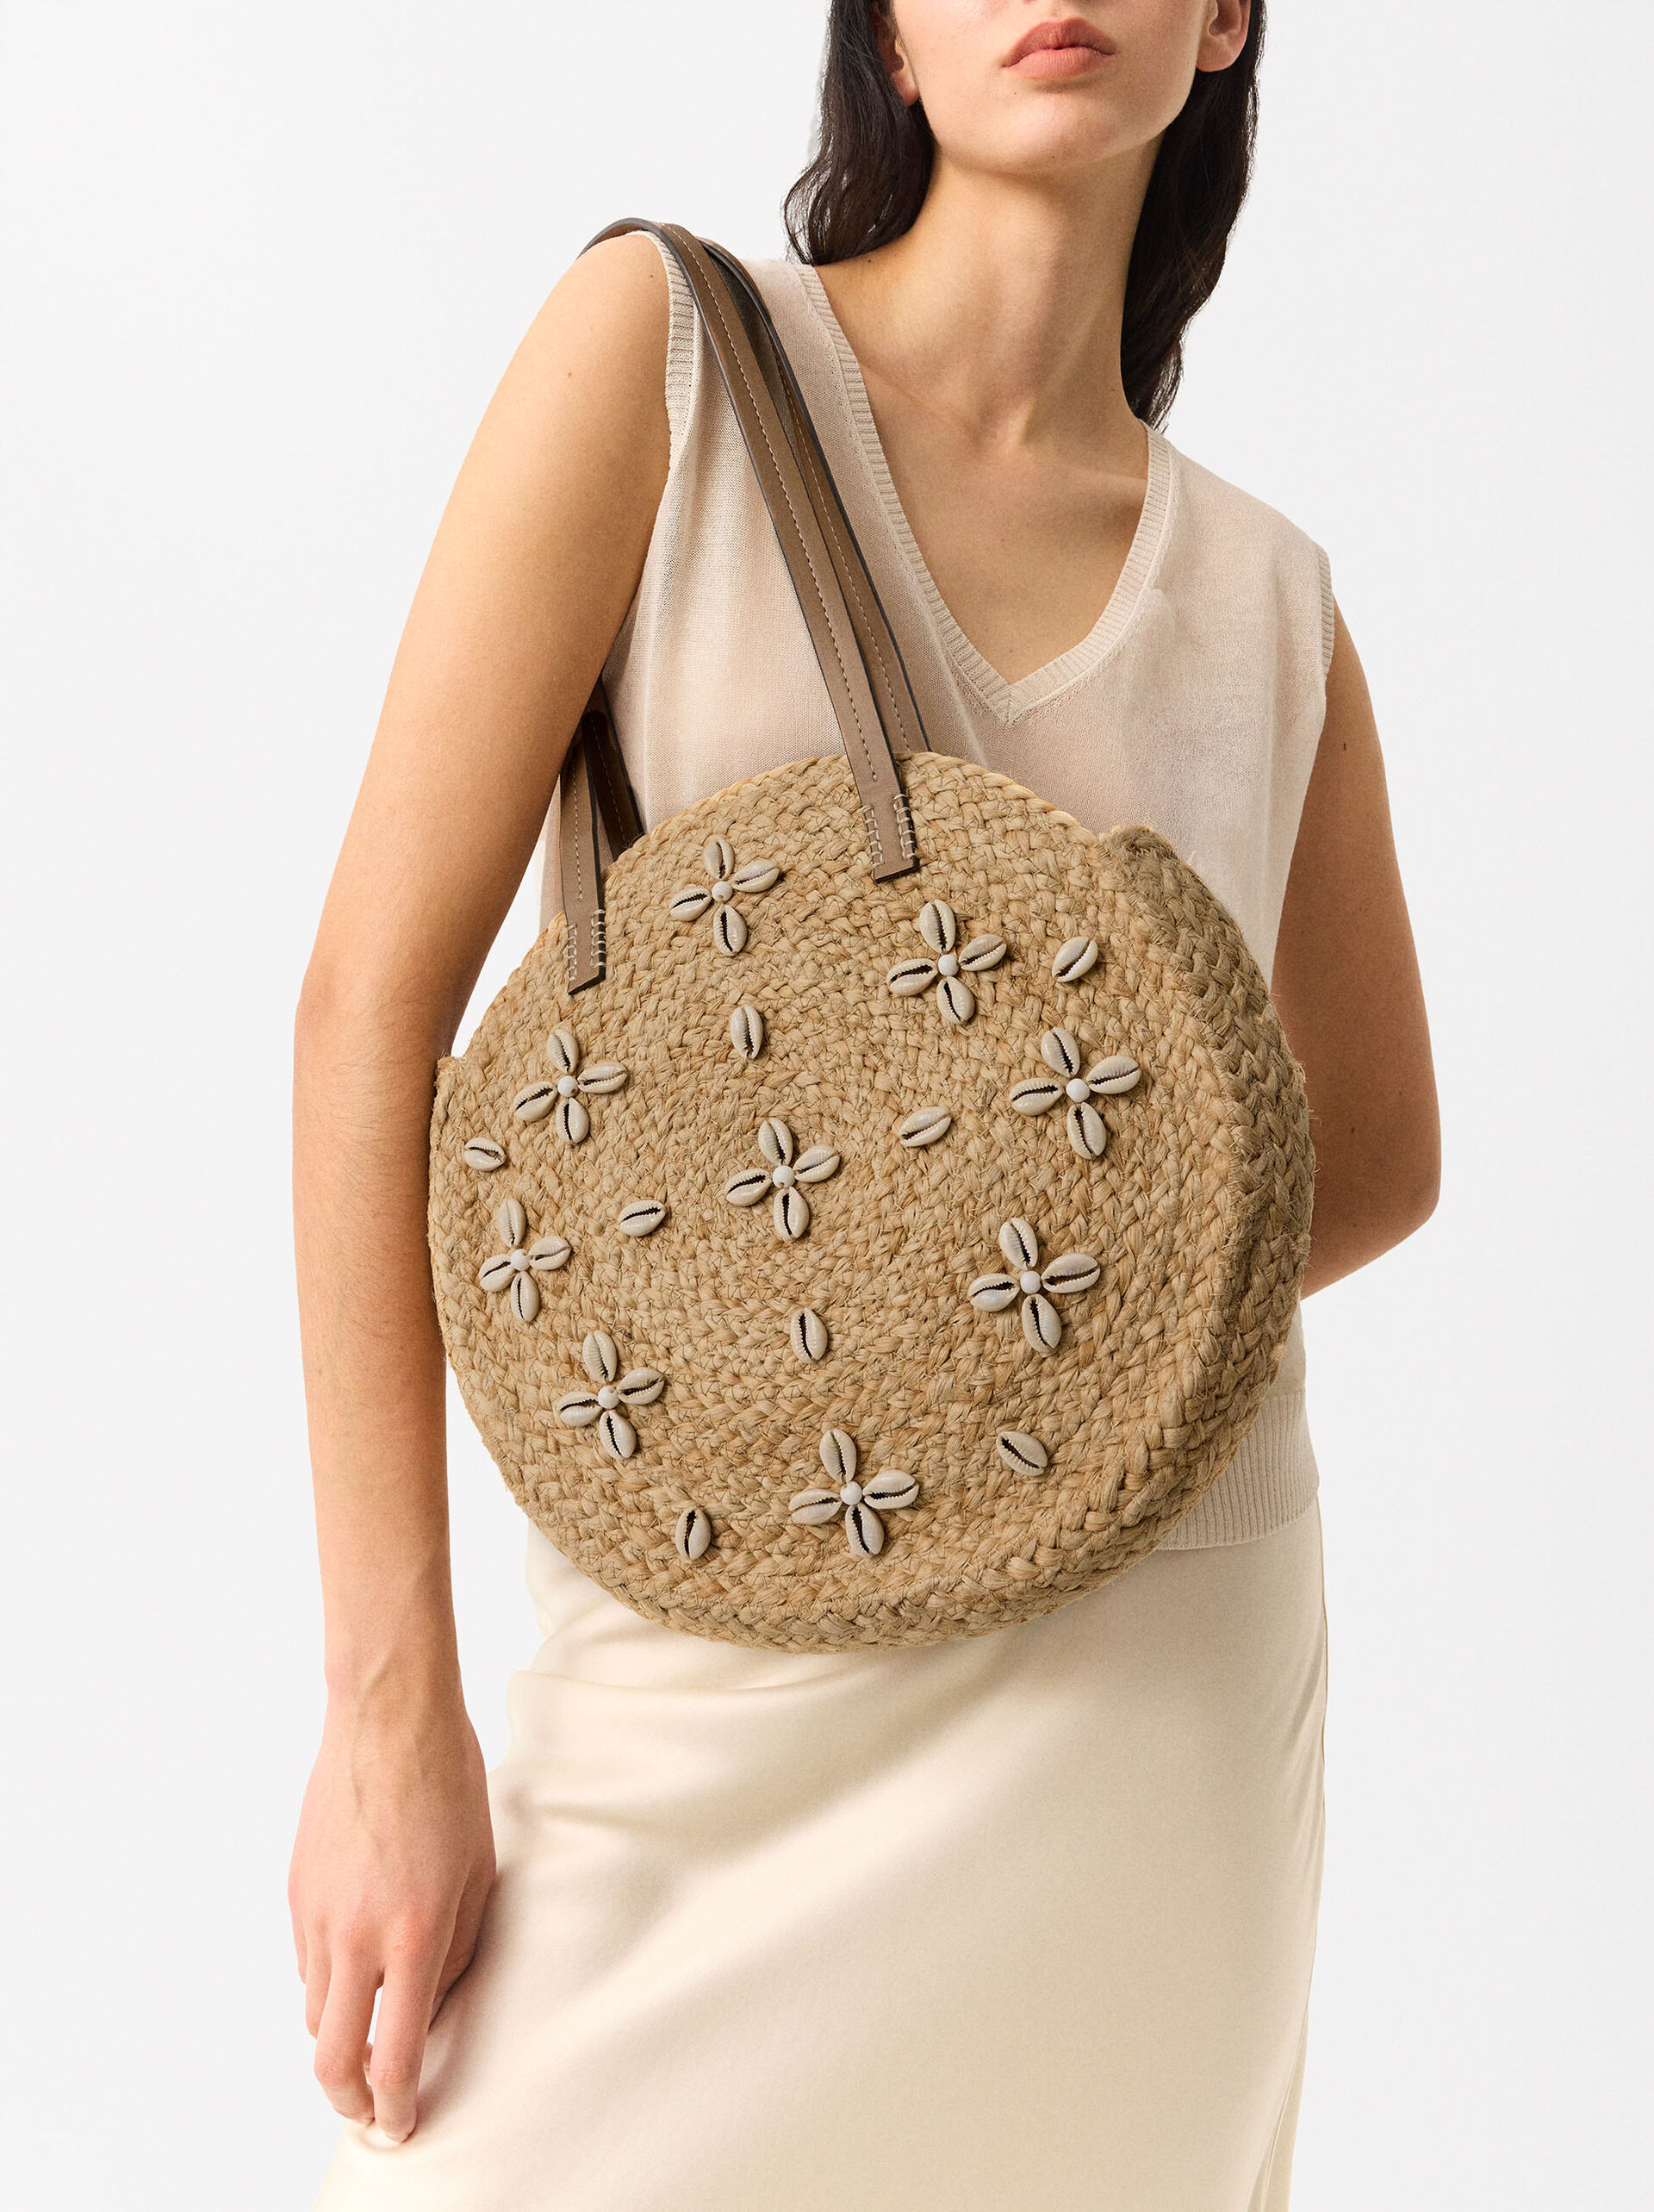 Sac Effet Paille Avec Coquillage image number 0.0